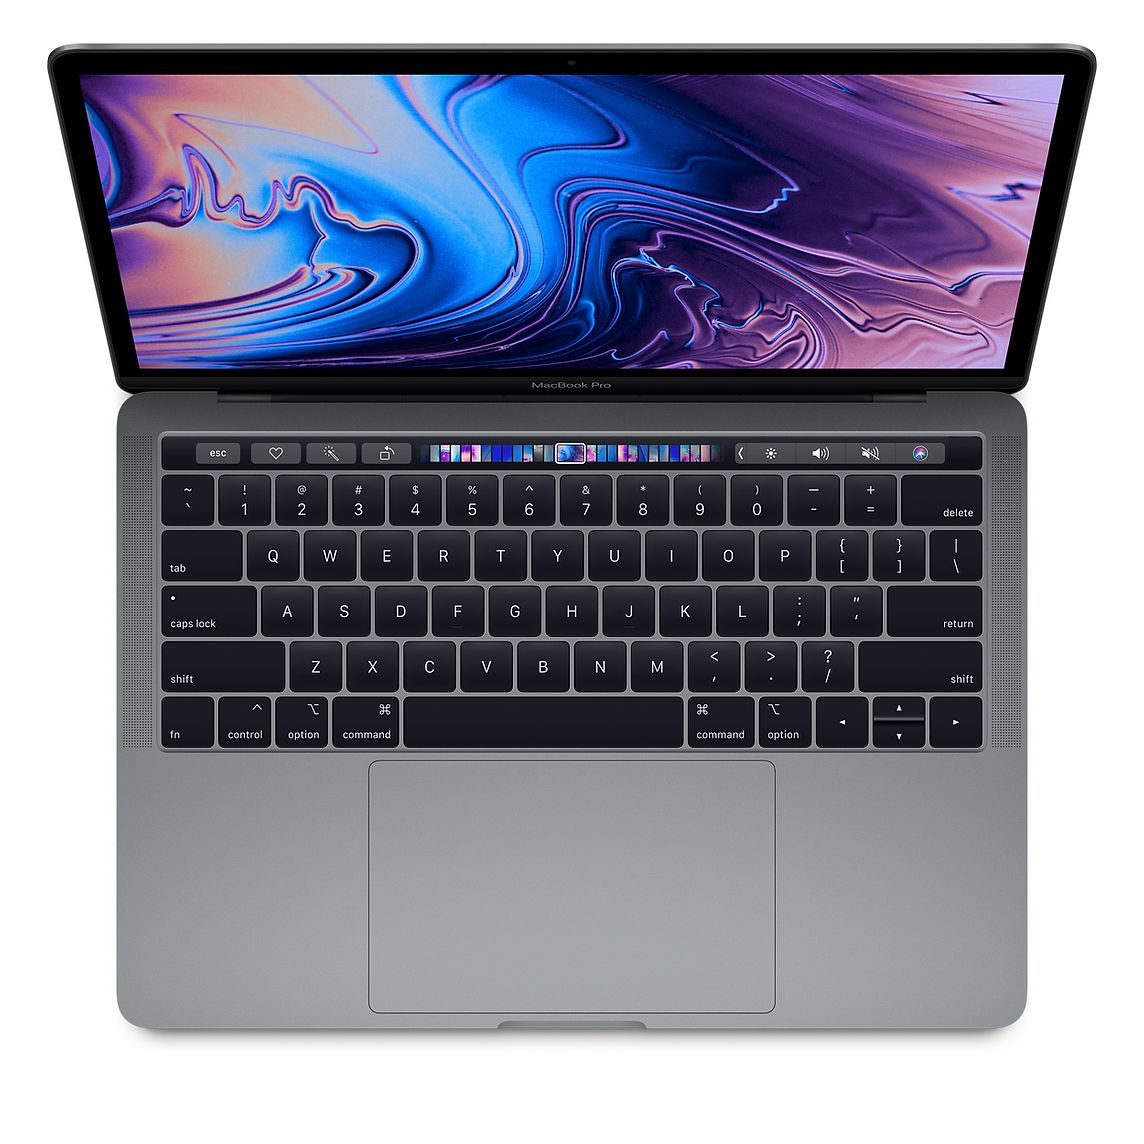 is it possible to uograde 2016 macbook pro ssd drive